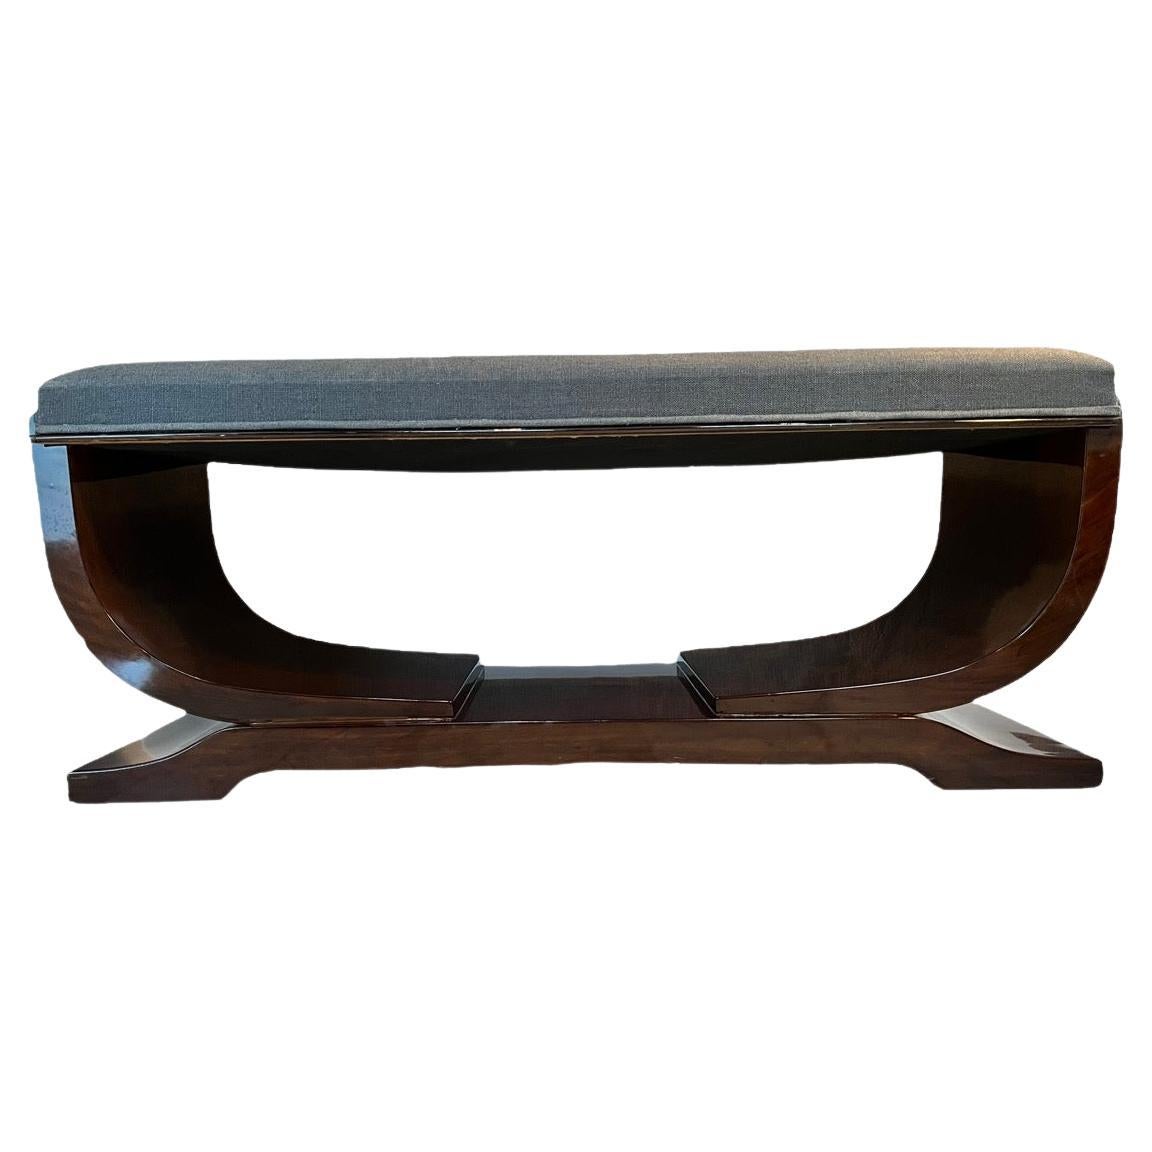 Art Deco Period '1920s' French Bench Made of Rosewood